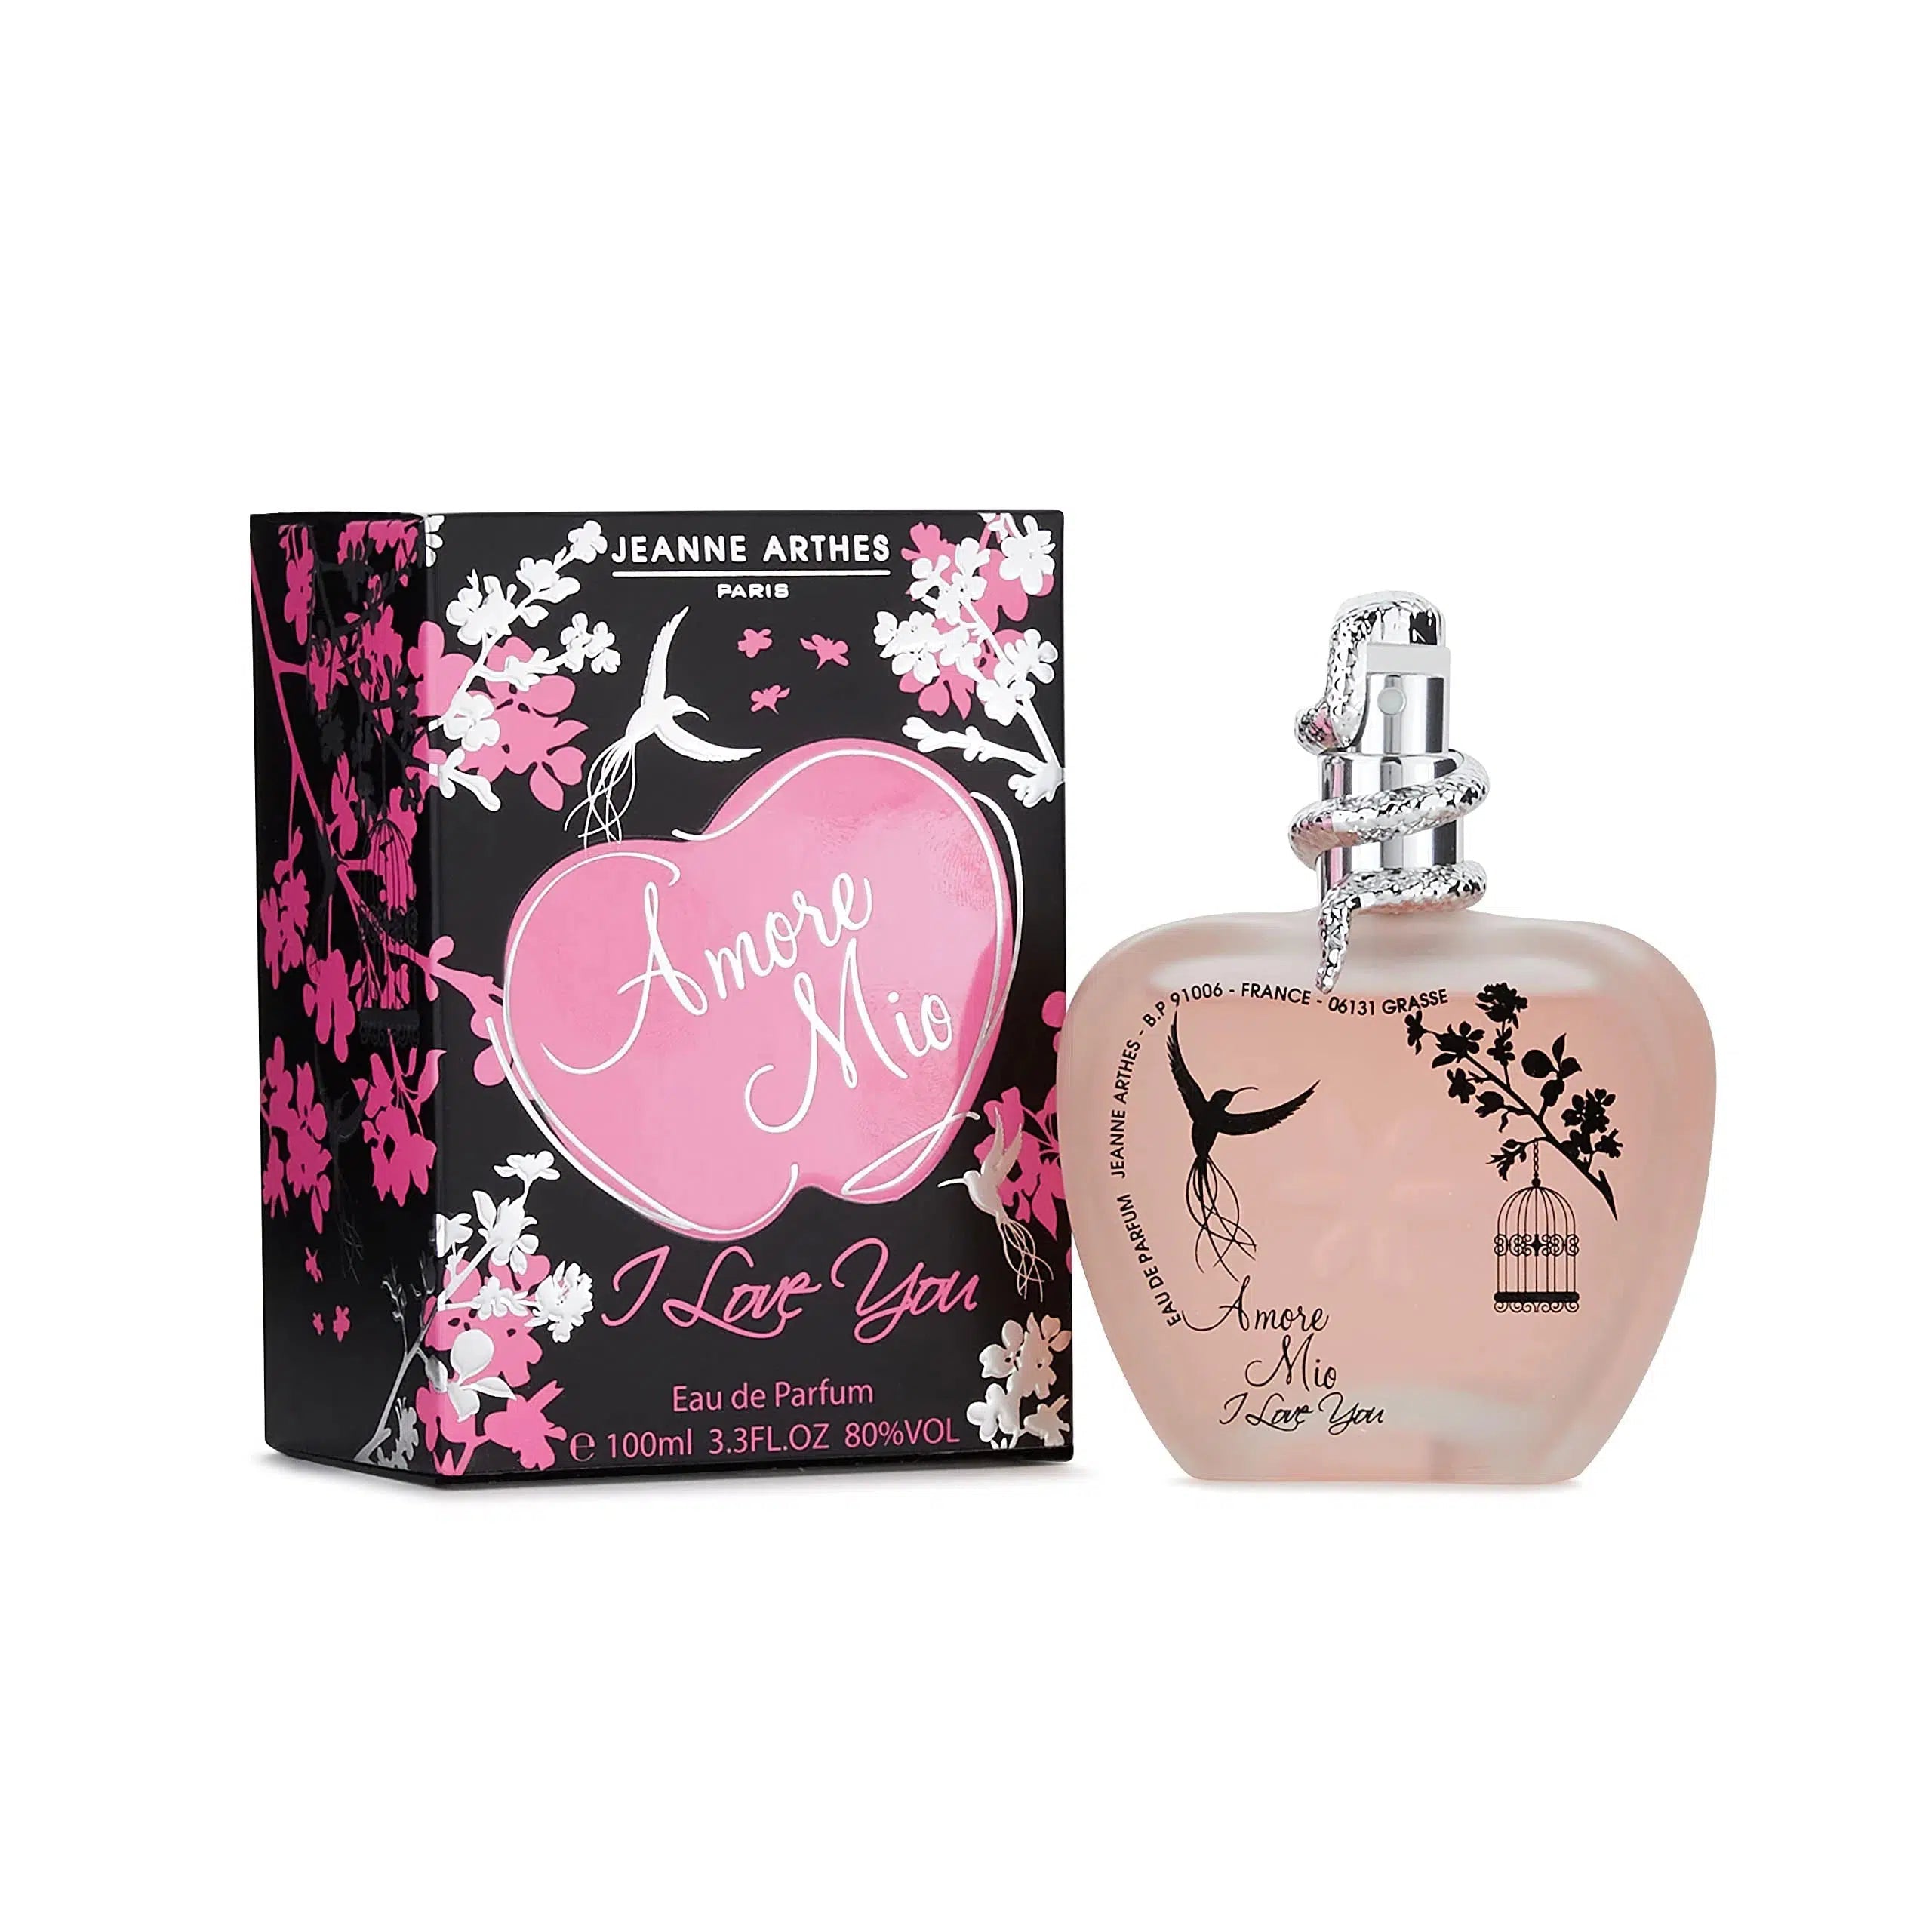 Jeanne Arthes Amore Mio I Love You EDP for Women 100ml